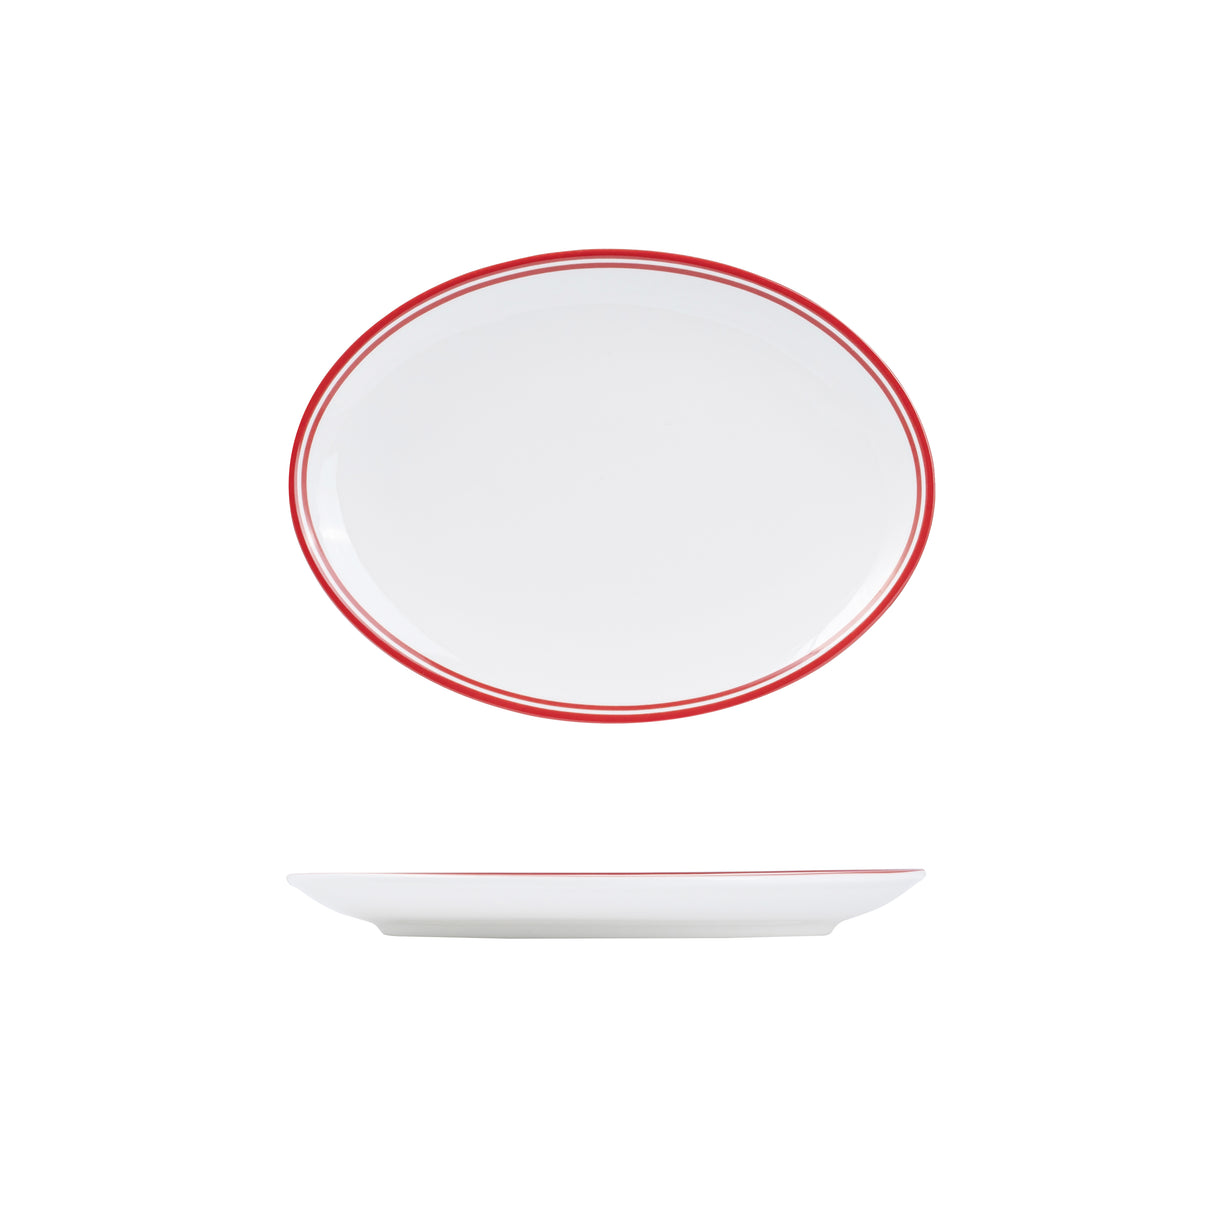 Nano Cru Oval Coupe Plate Red 260 X 190mm: Pack of 12